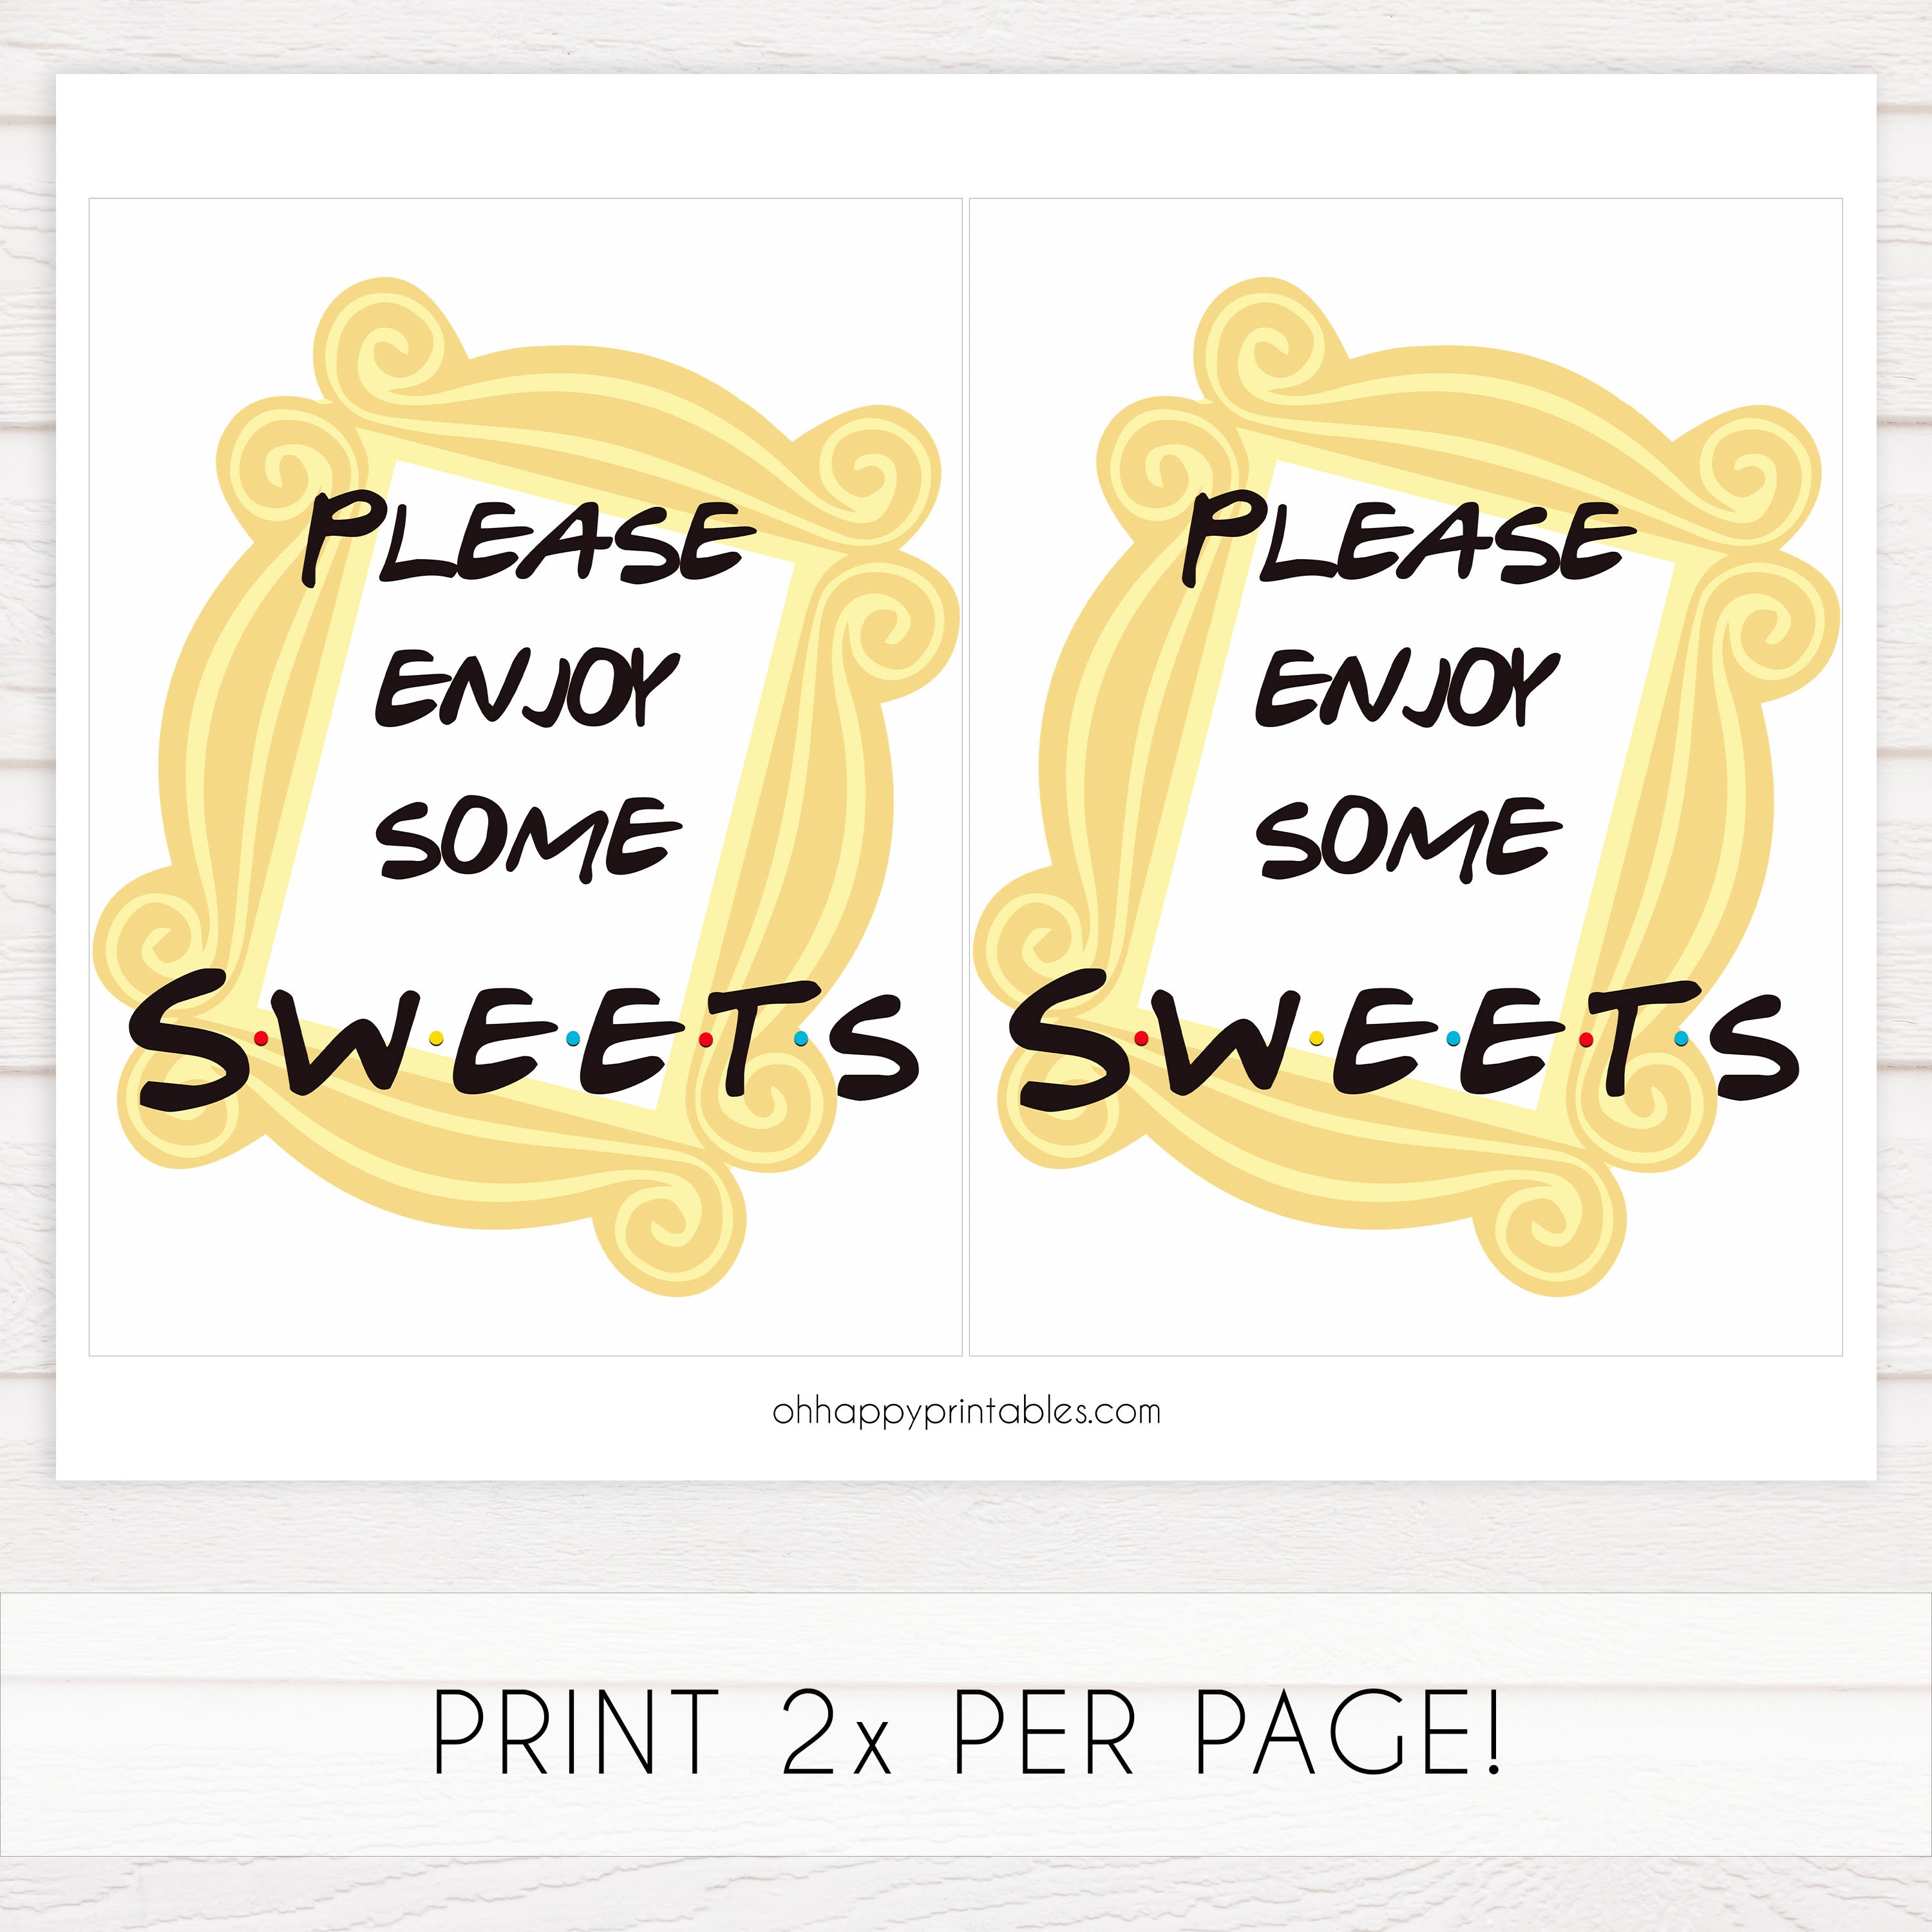 sweets baby table sign, sweets baby sign, Printable baby shower games, friends fun baby games, baby shower games, fun baby shower ideas, top baby shower ideas, friends baby shower, friends baby shower ideas